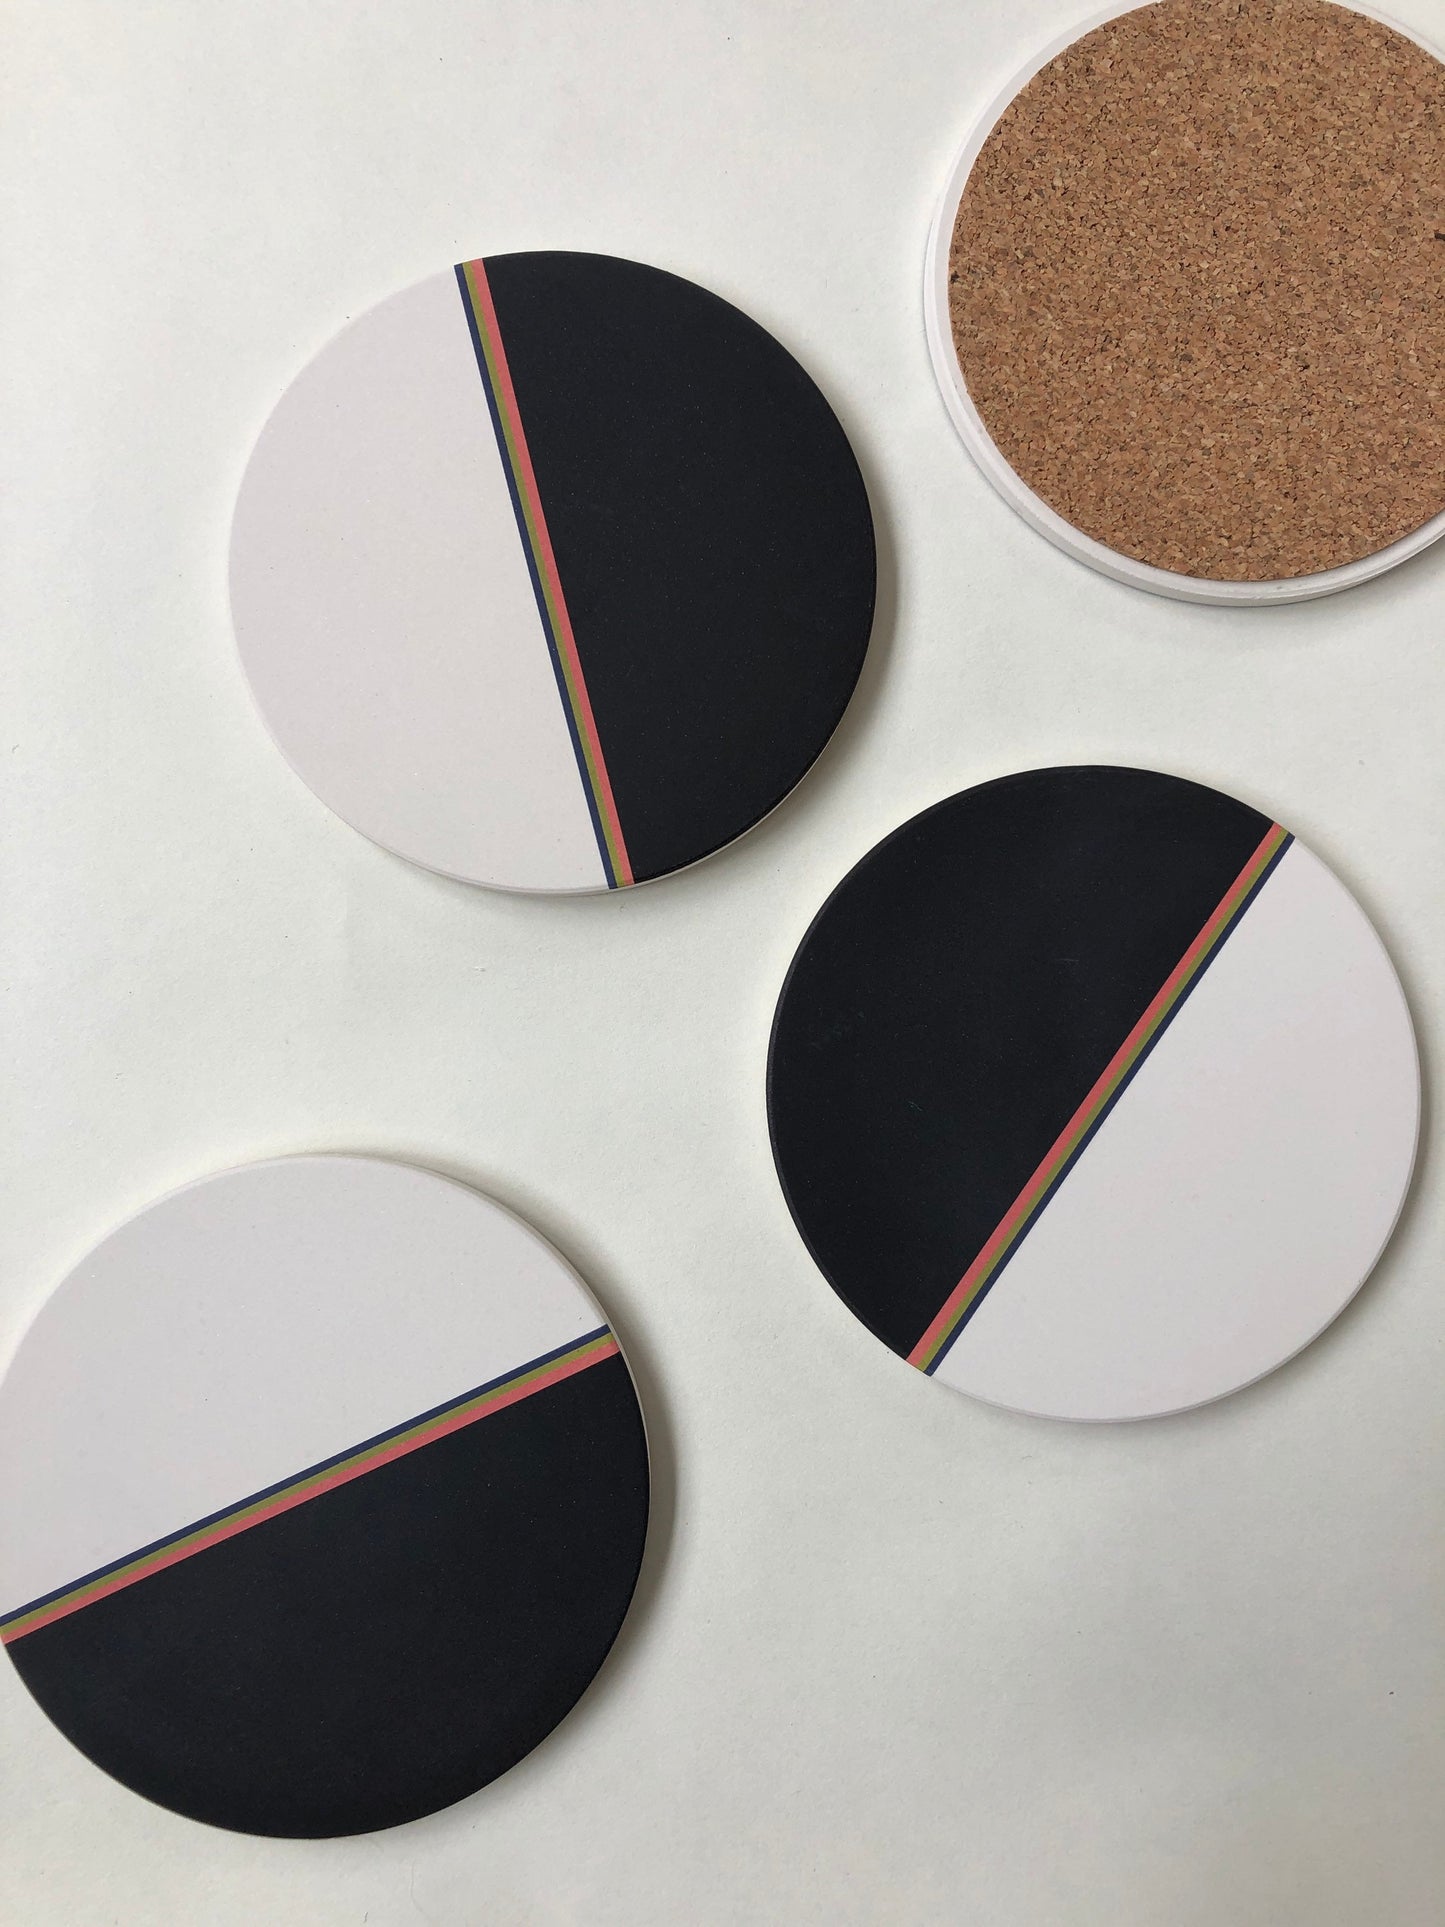 DIPPED COASTERS set of 4 ceramic absorbent coasters